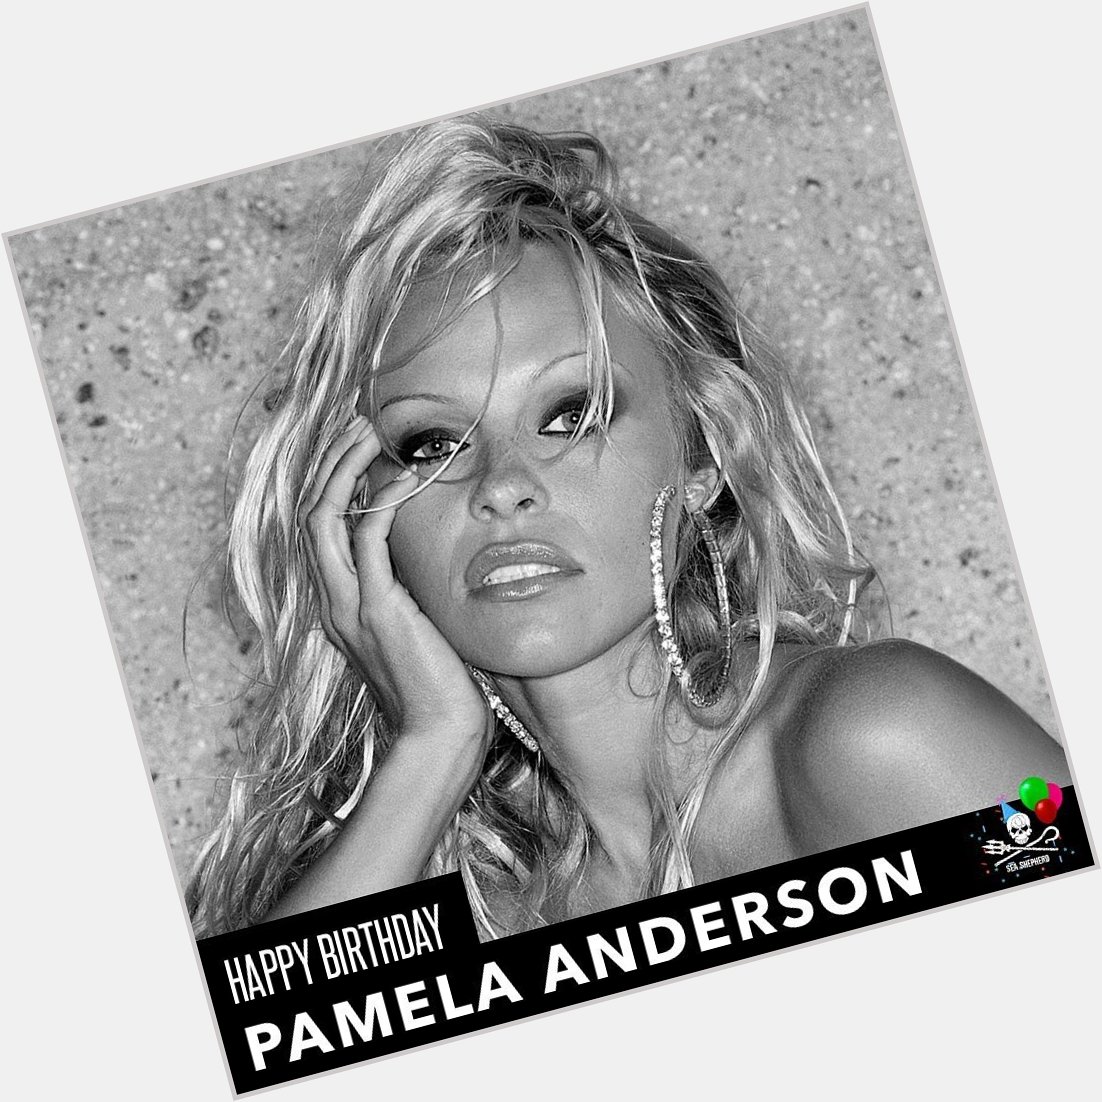 Happy belated birthday to \"Pamela Anderson\" we cant forget about our fabulous pinup models/ stars:) 